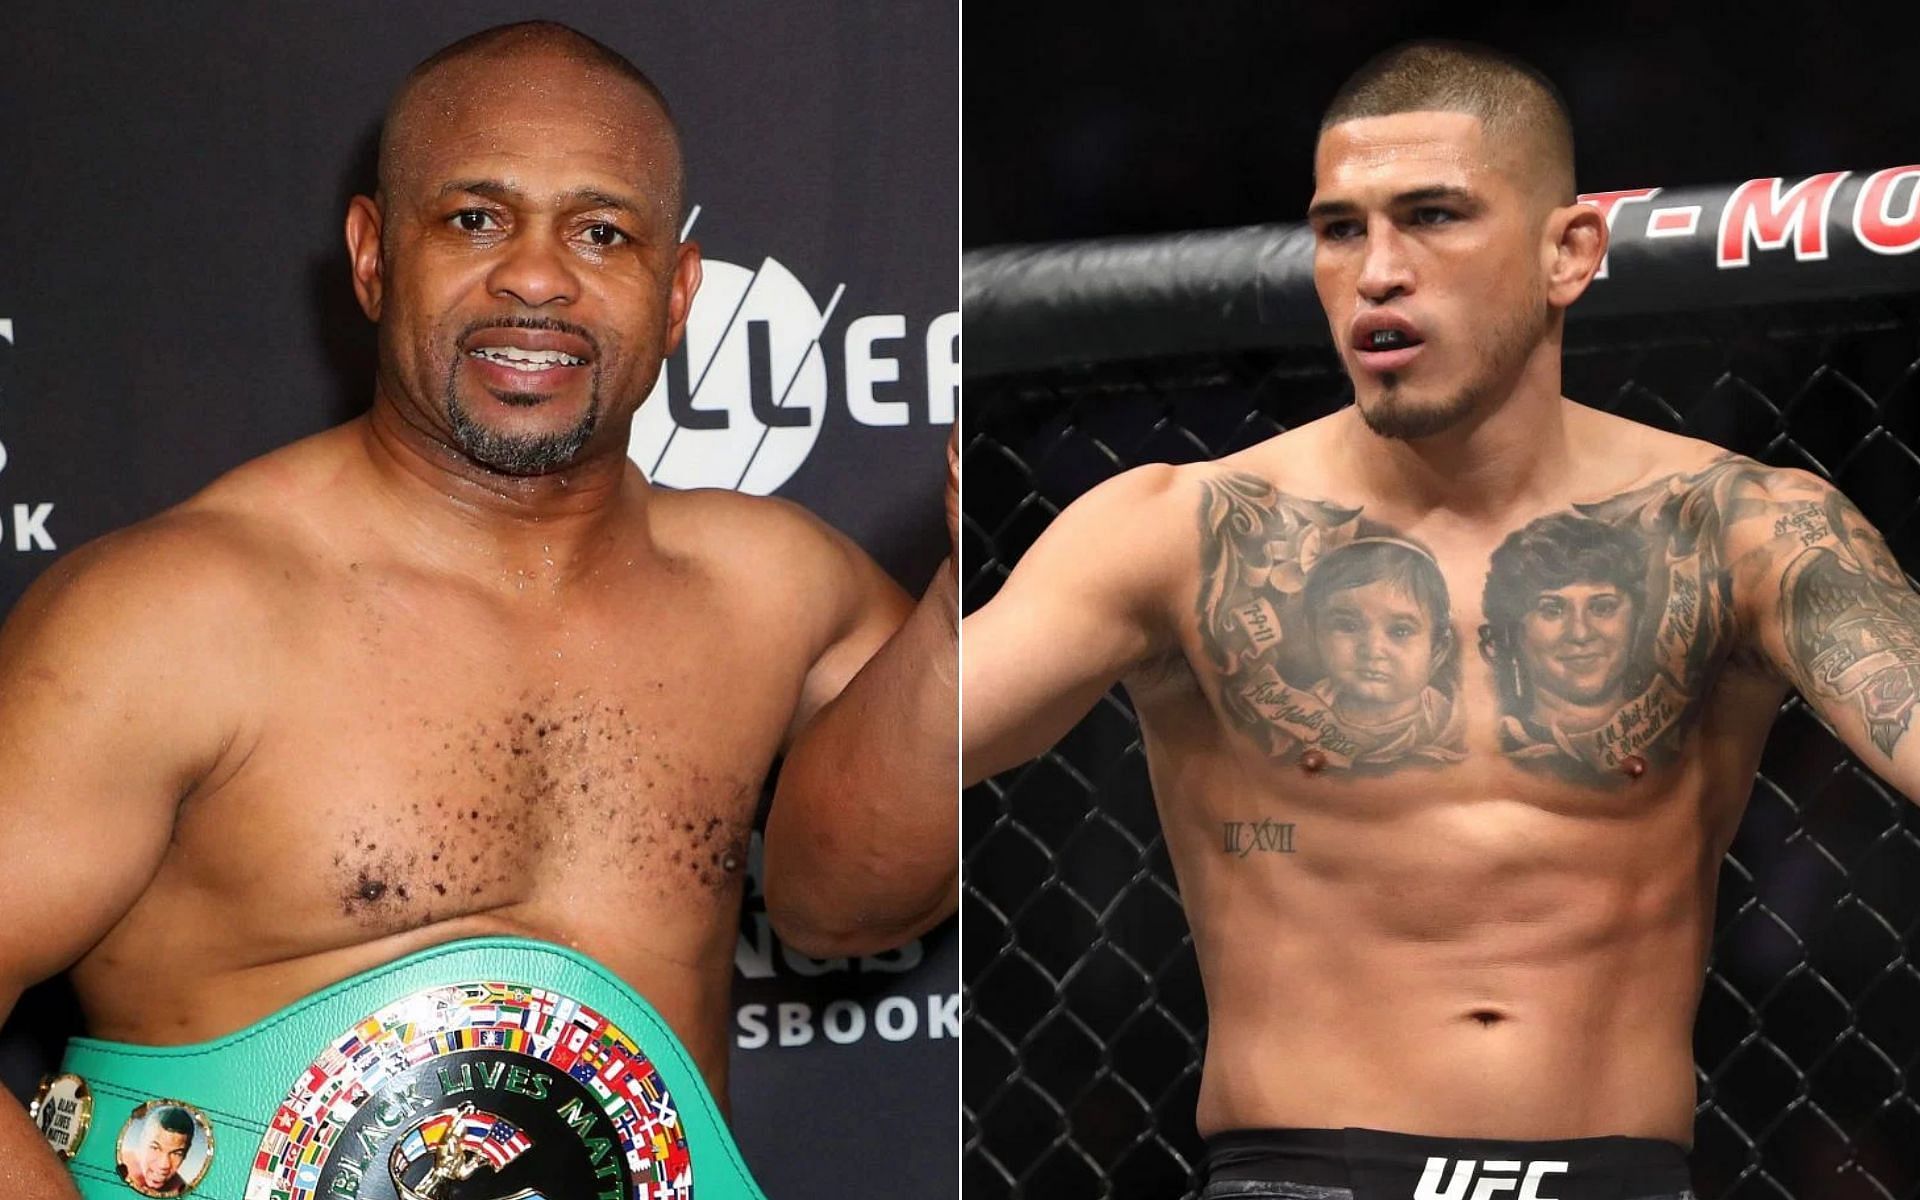 Gamebred Boxing 4: Roy Jones Jr. vs Anthony Pettis - Preview, Prediction, and Odds